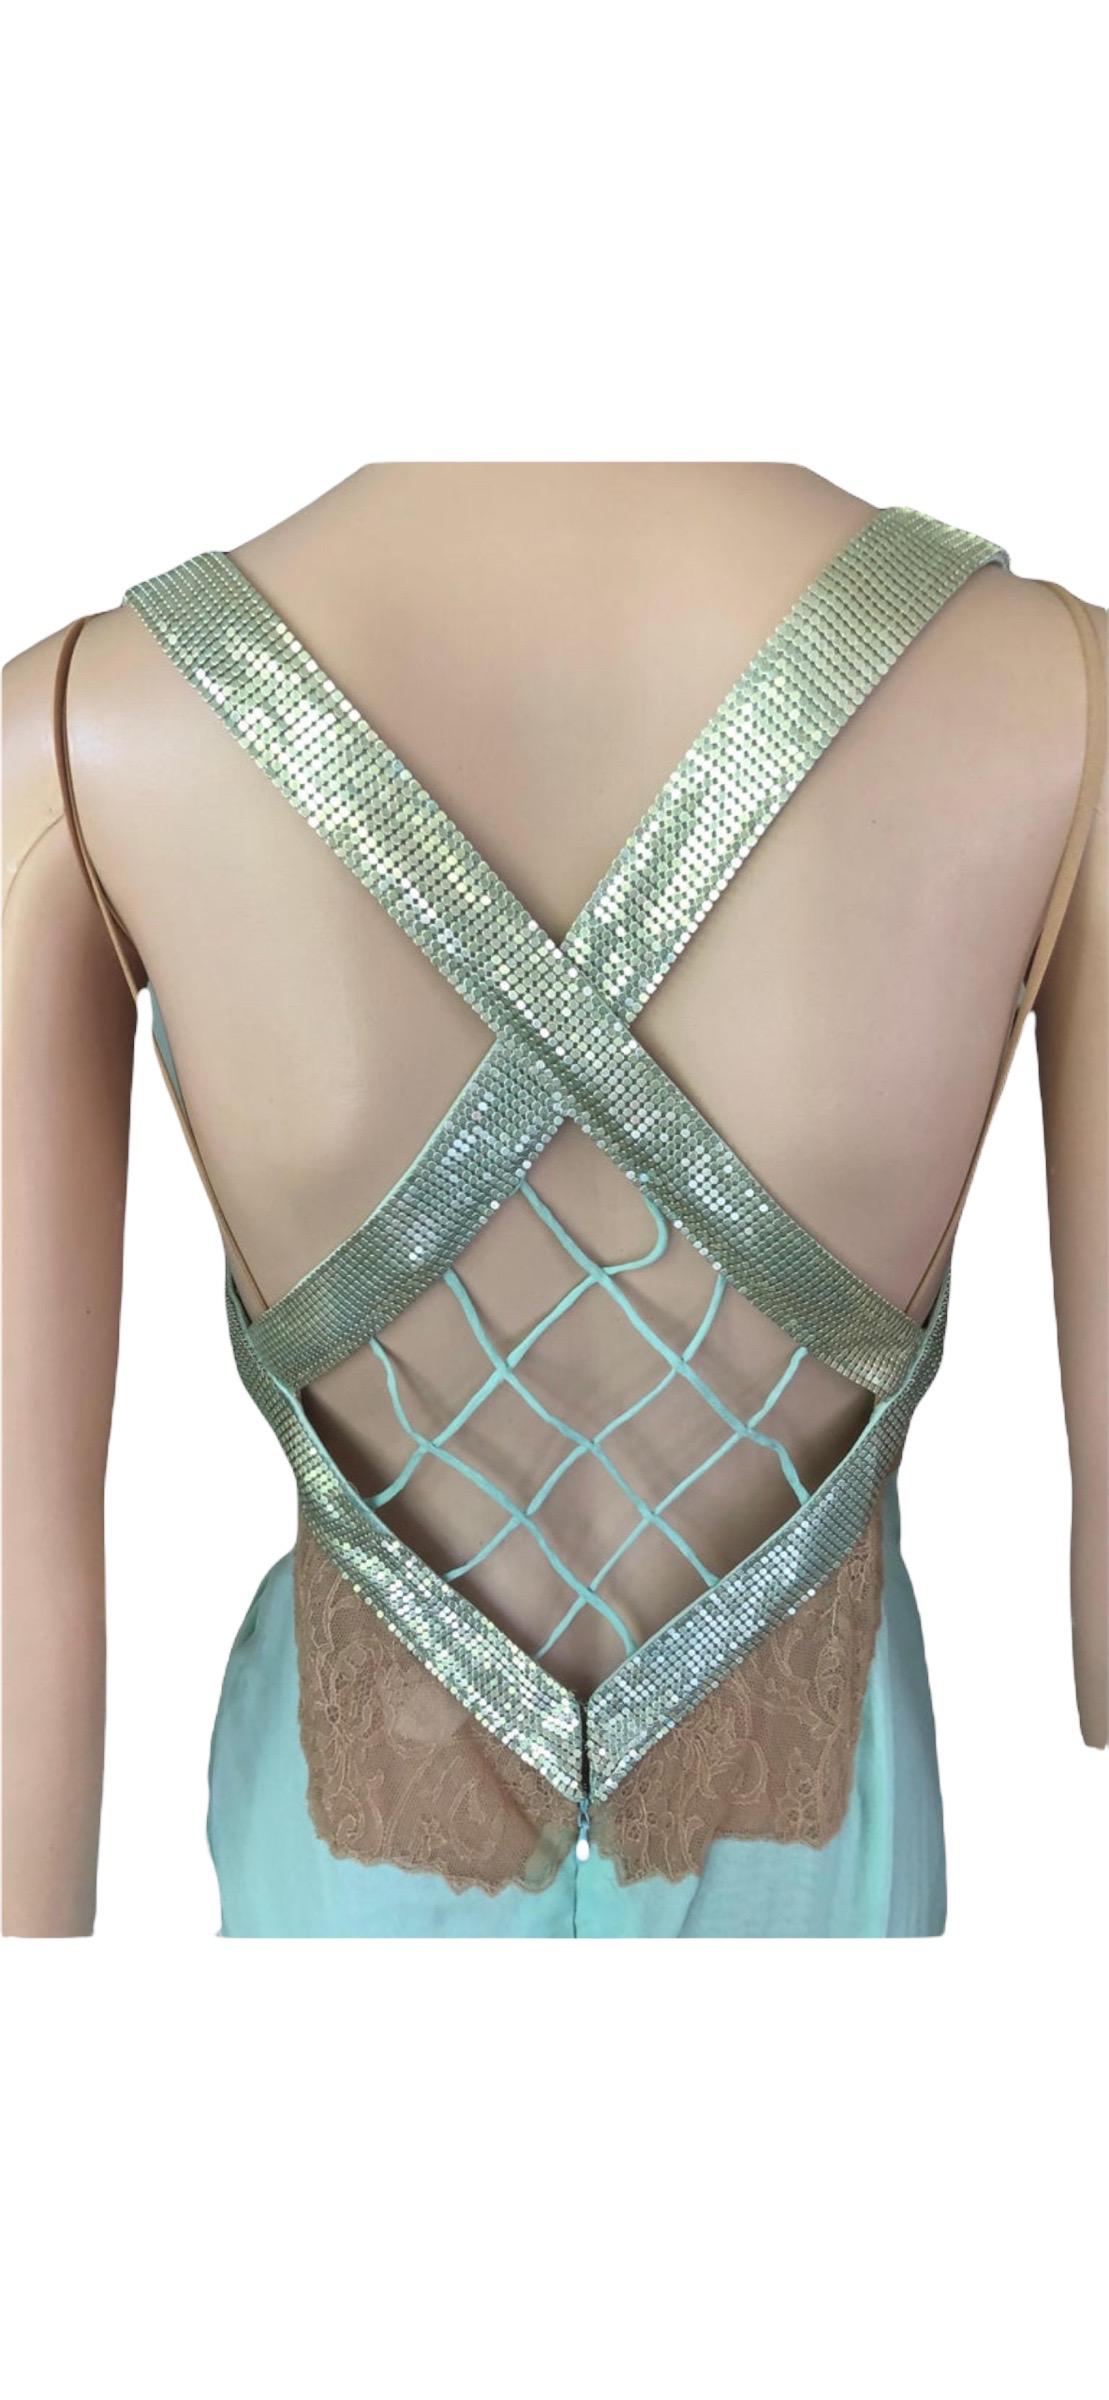 Gianni Versace S/S 2003 Runway Sheer Lace Oroton Metal Mesh Embellished Dress For Sale 10